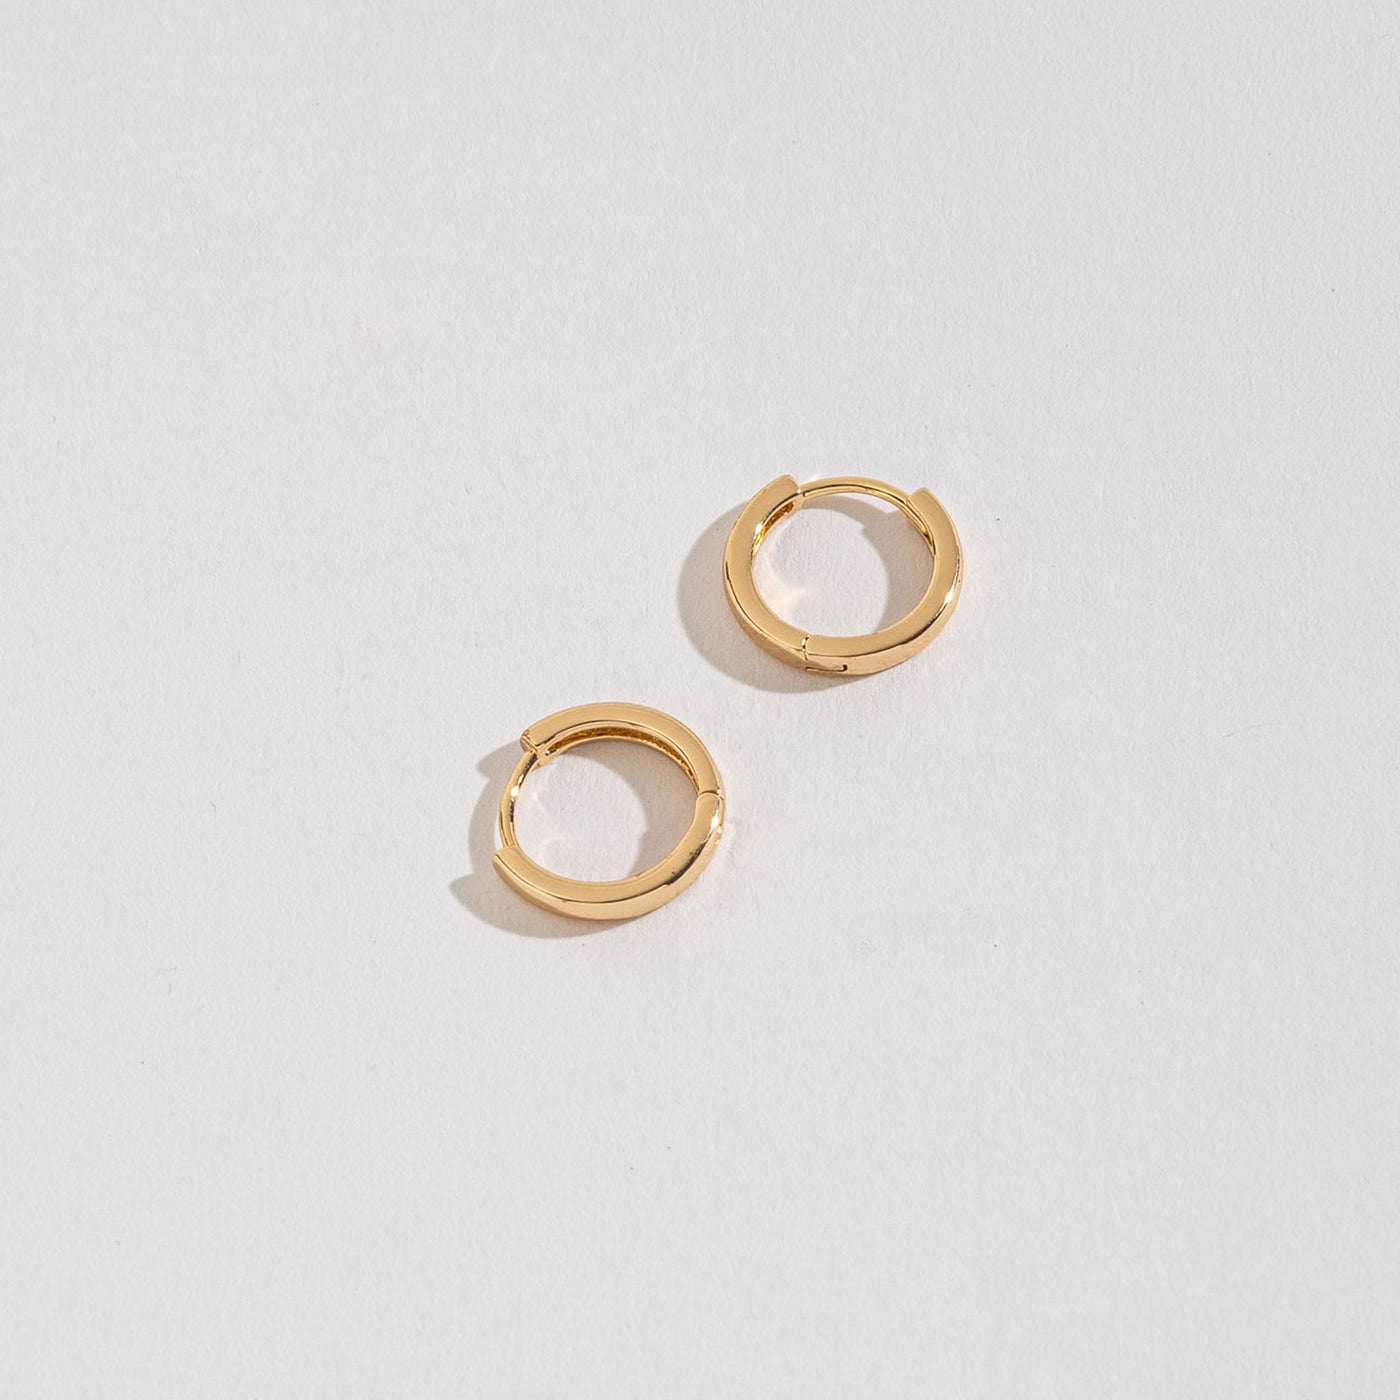 gold medium huggie hoops on a white background.